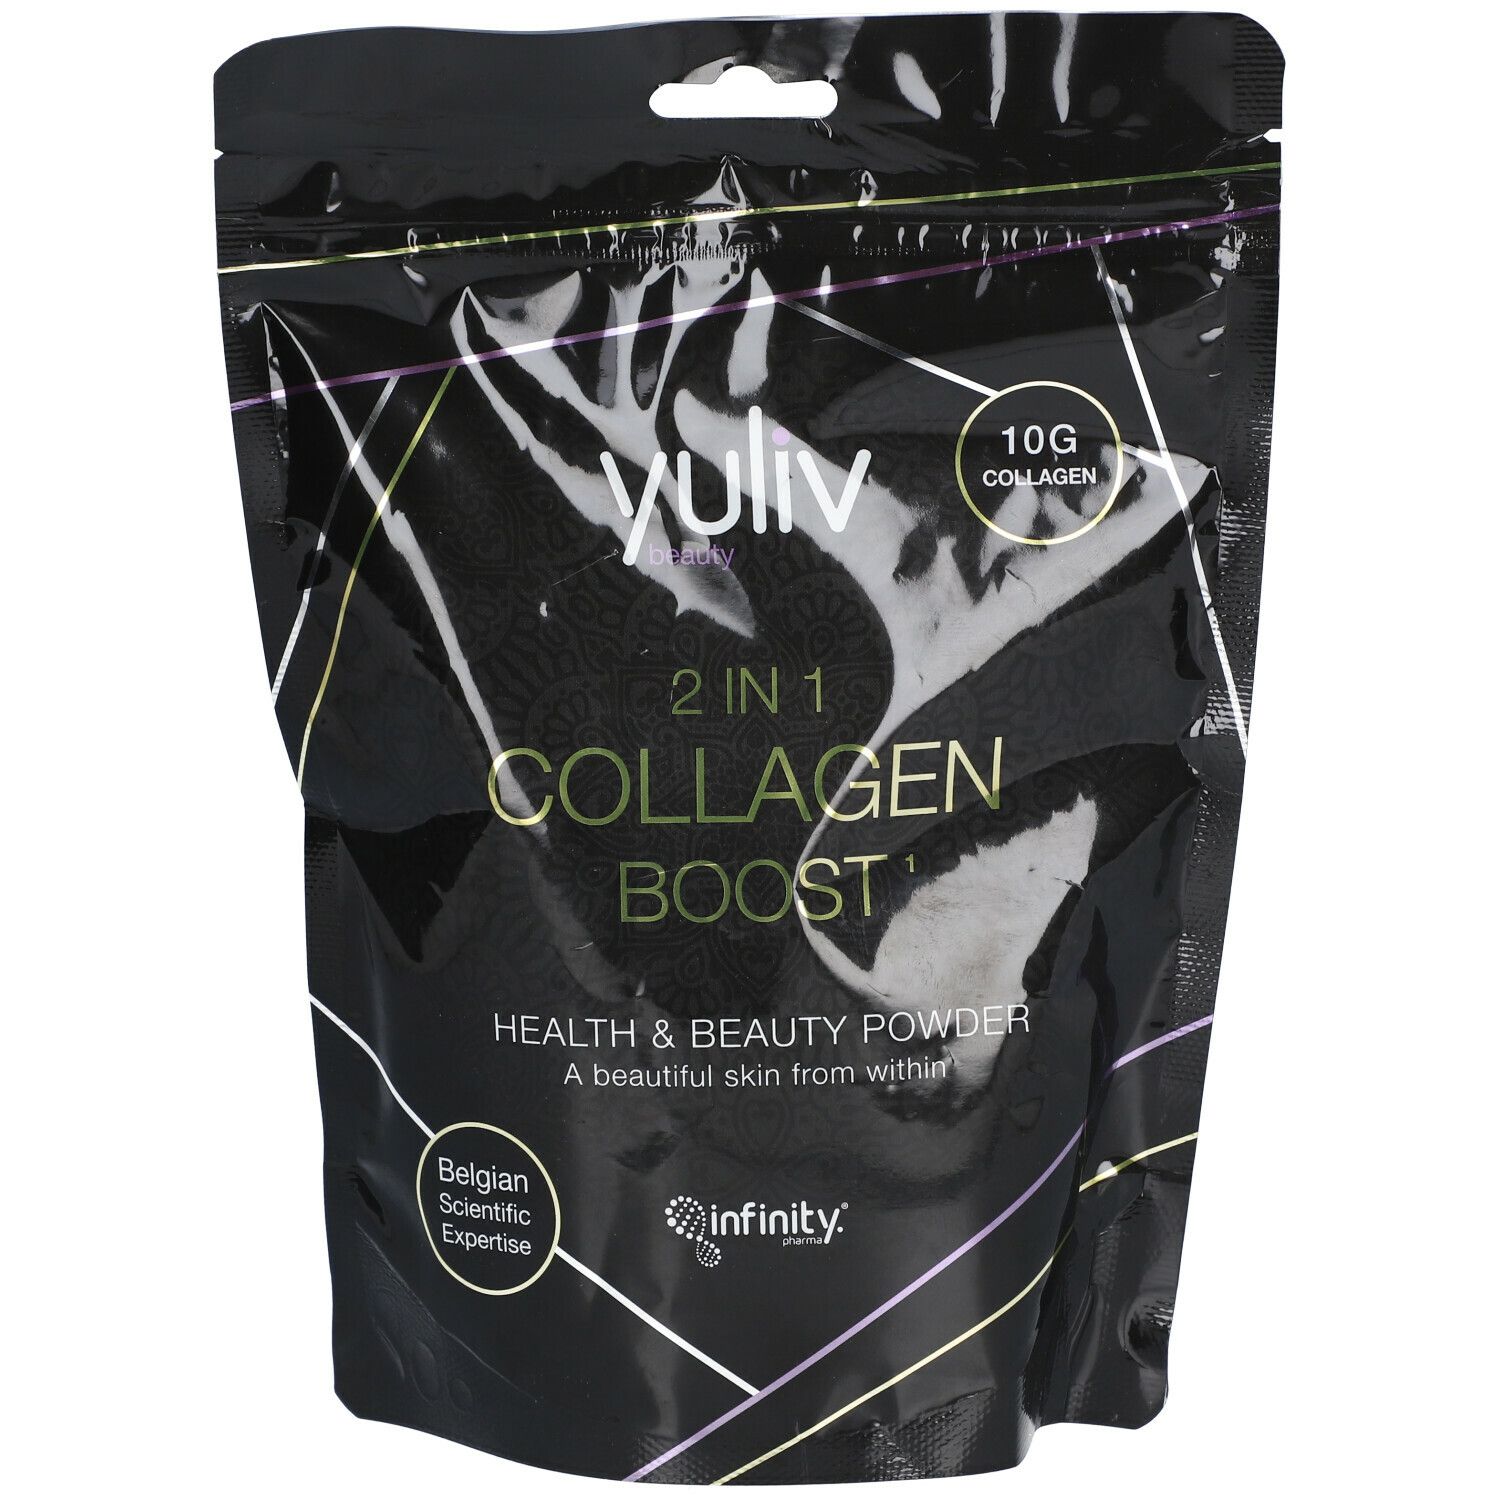 Yuliv Collagen Boost 300 g poudre